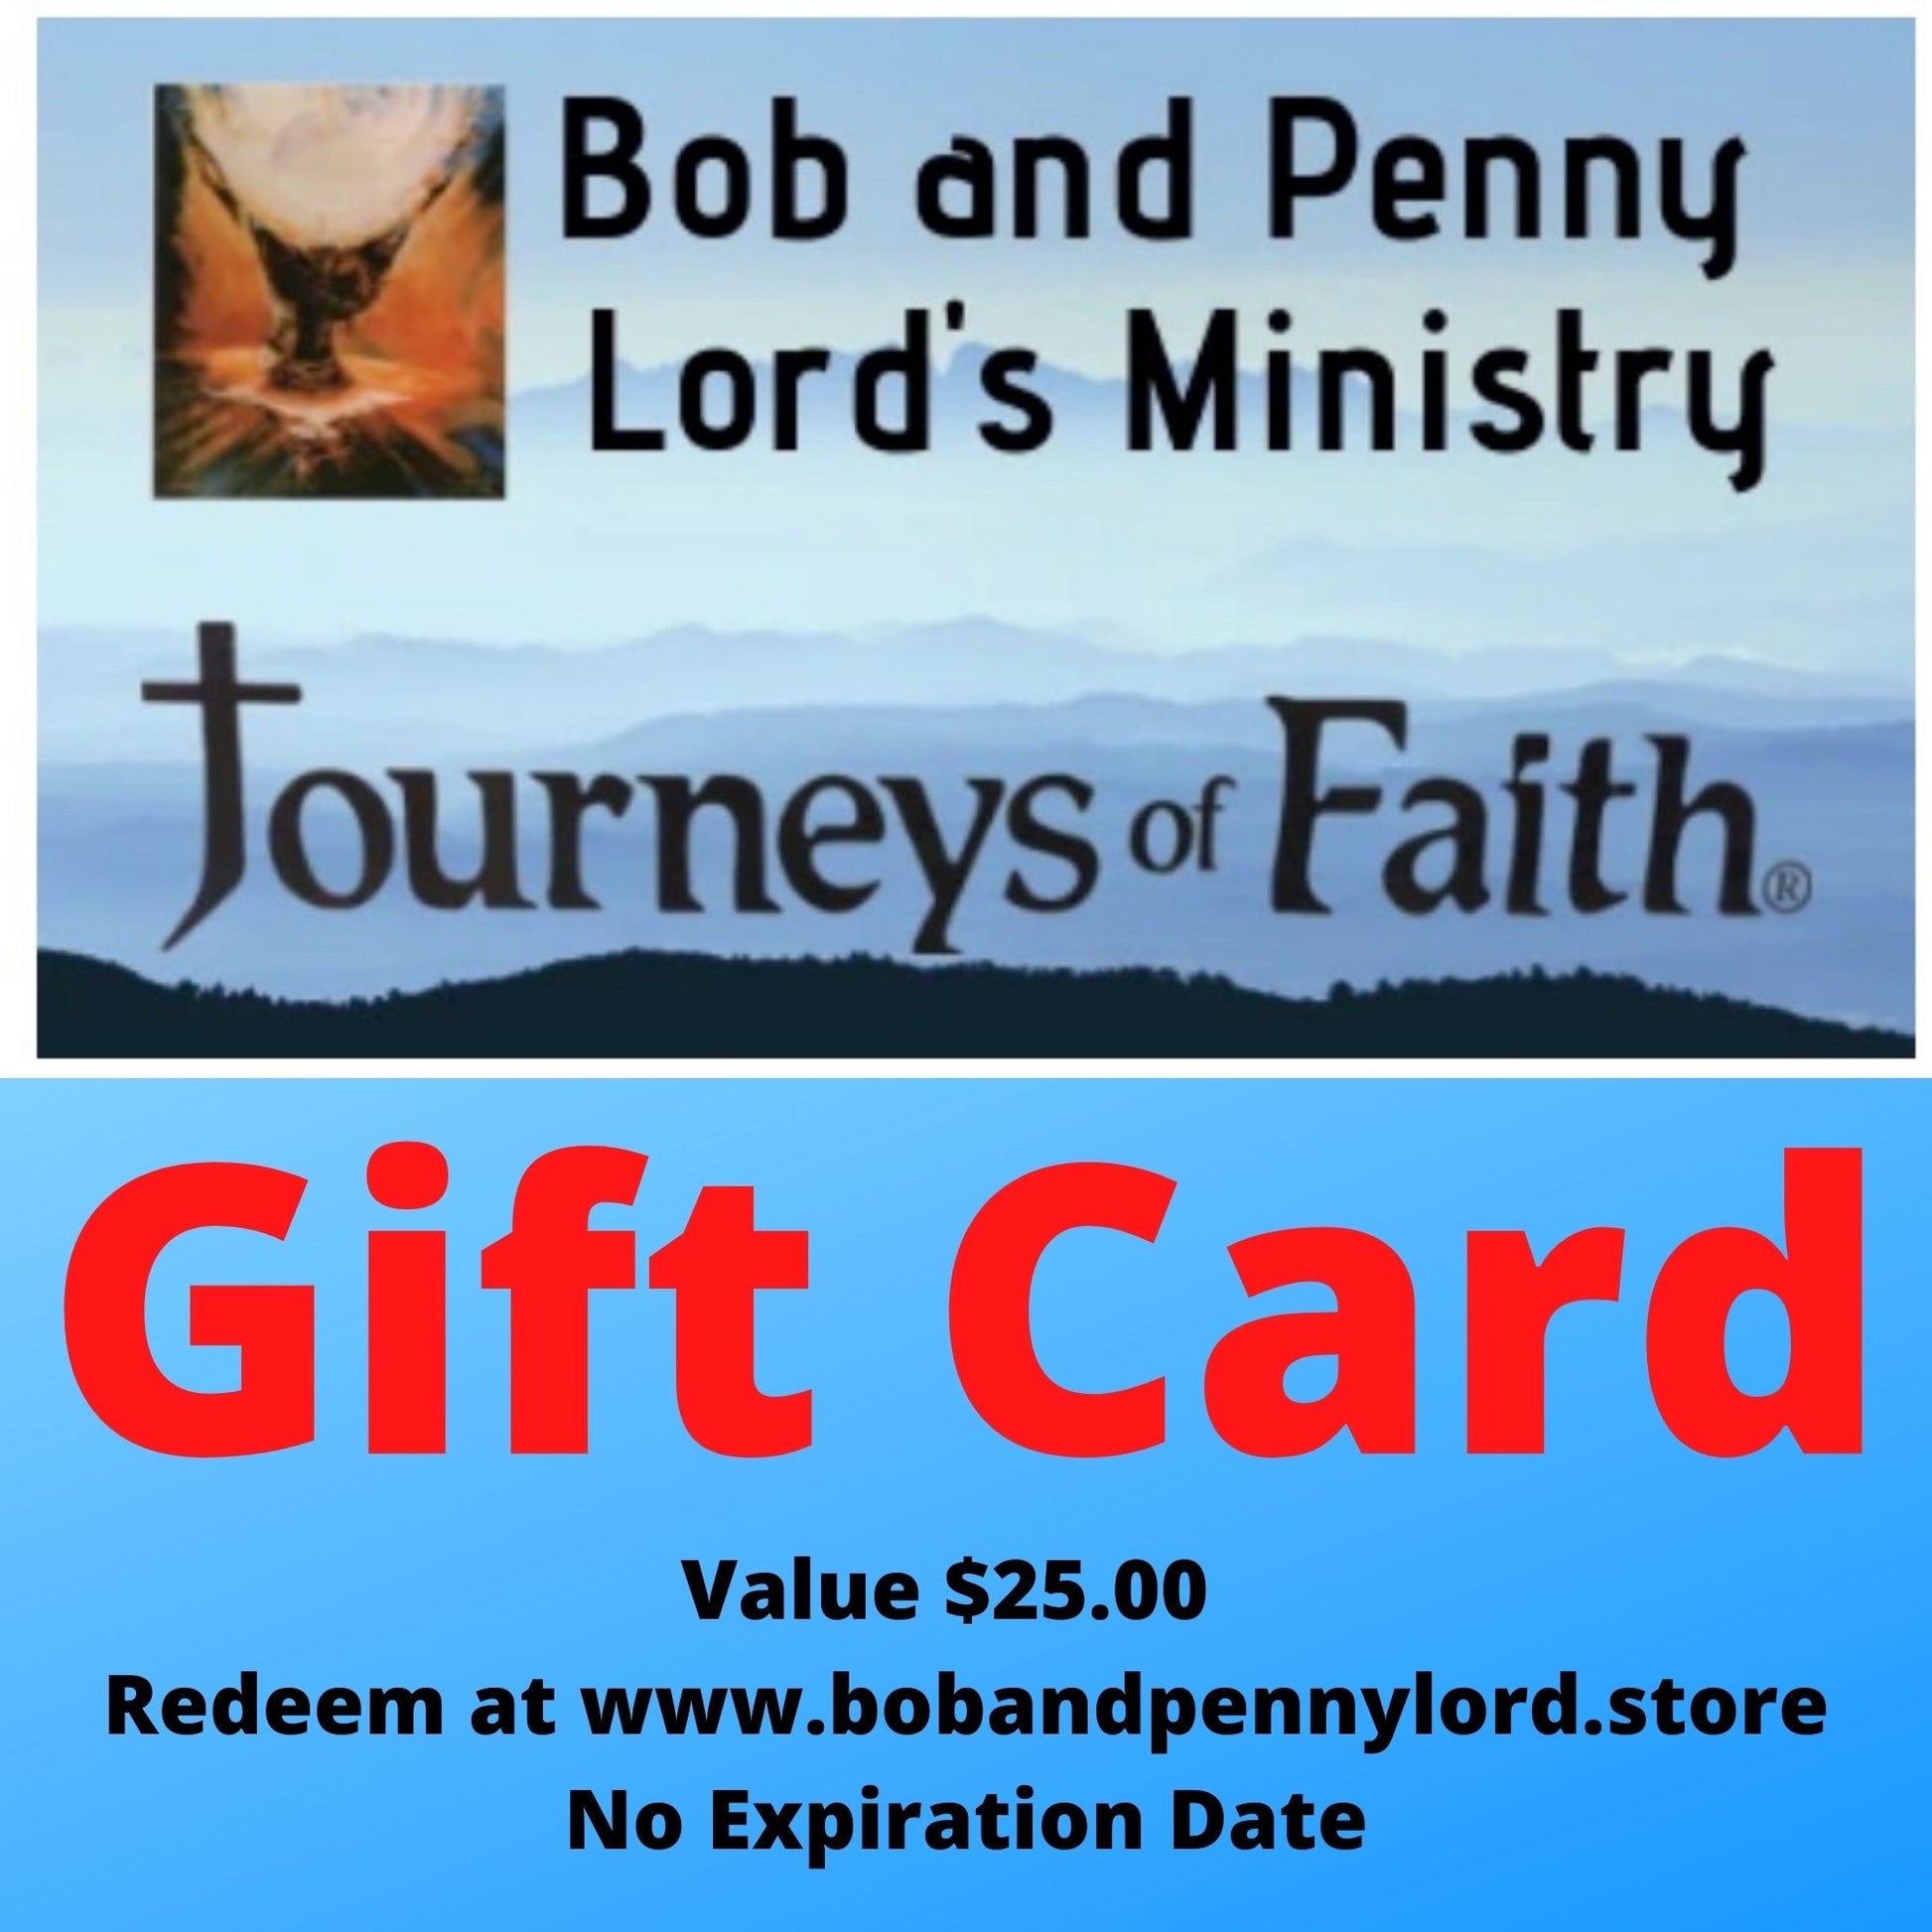 Bob and Penny Lord Store Gift Card Choose your Amount - Bob and Penny Lord